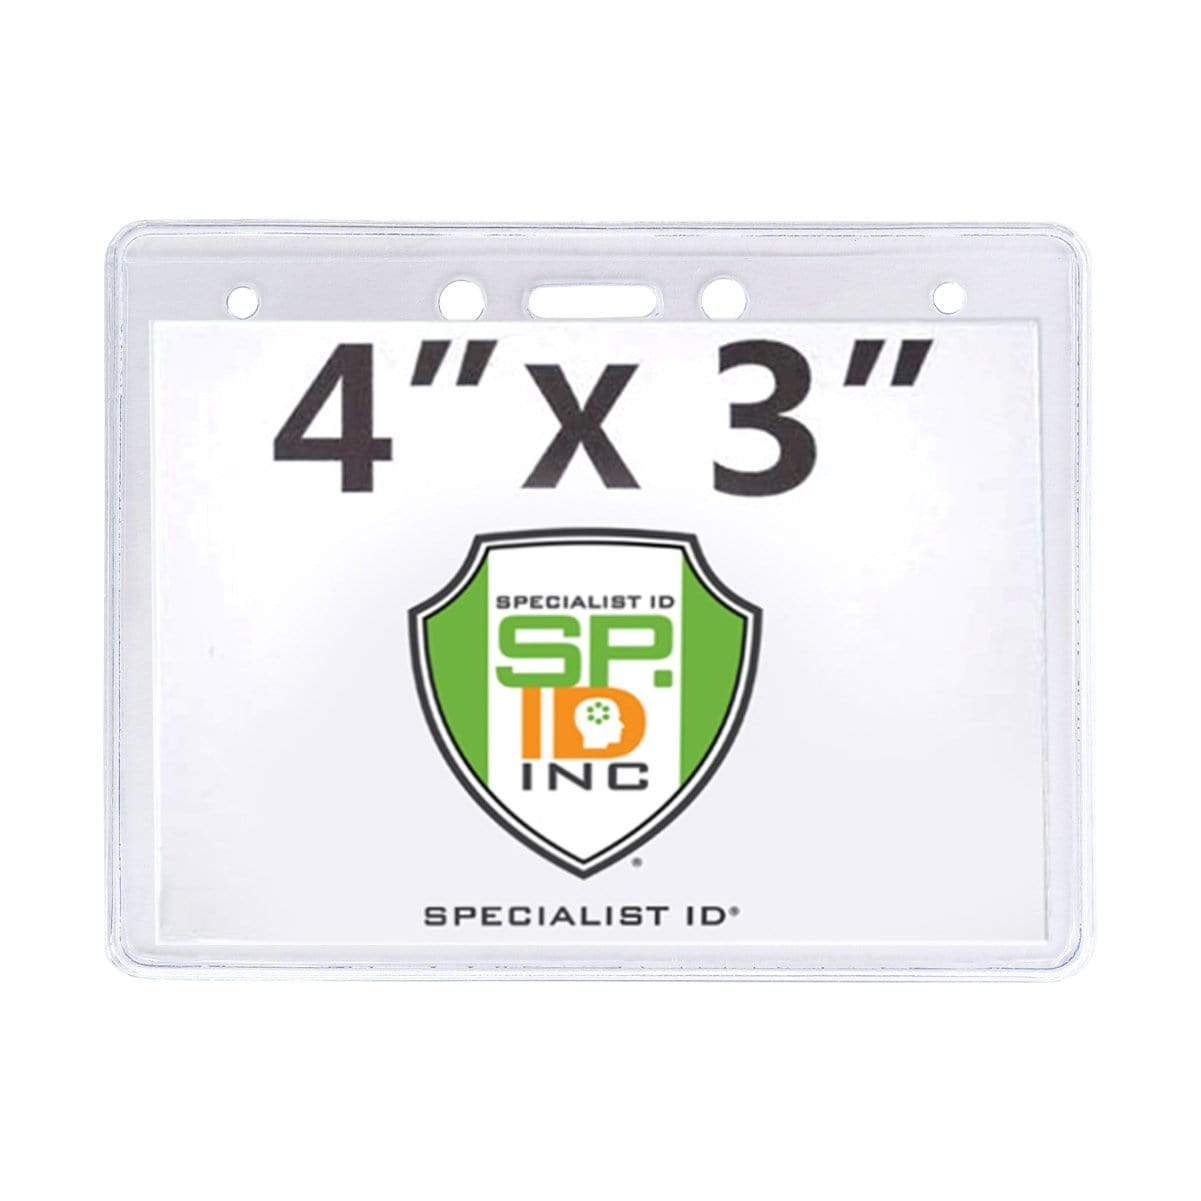 Economical 4 x 3 Horizontal Badge Holder - Clear Vinyl 4x3 Card Holder with Lanyard Slot & Chain Holes